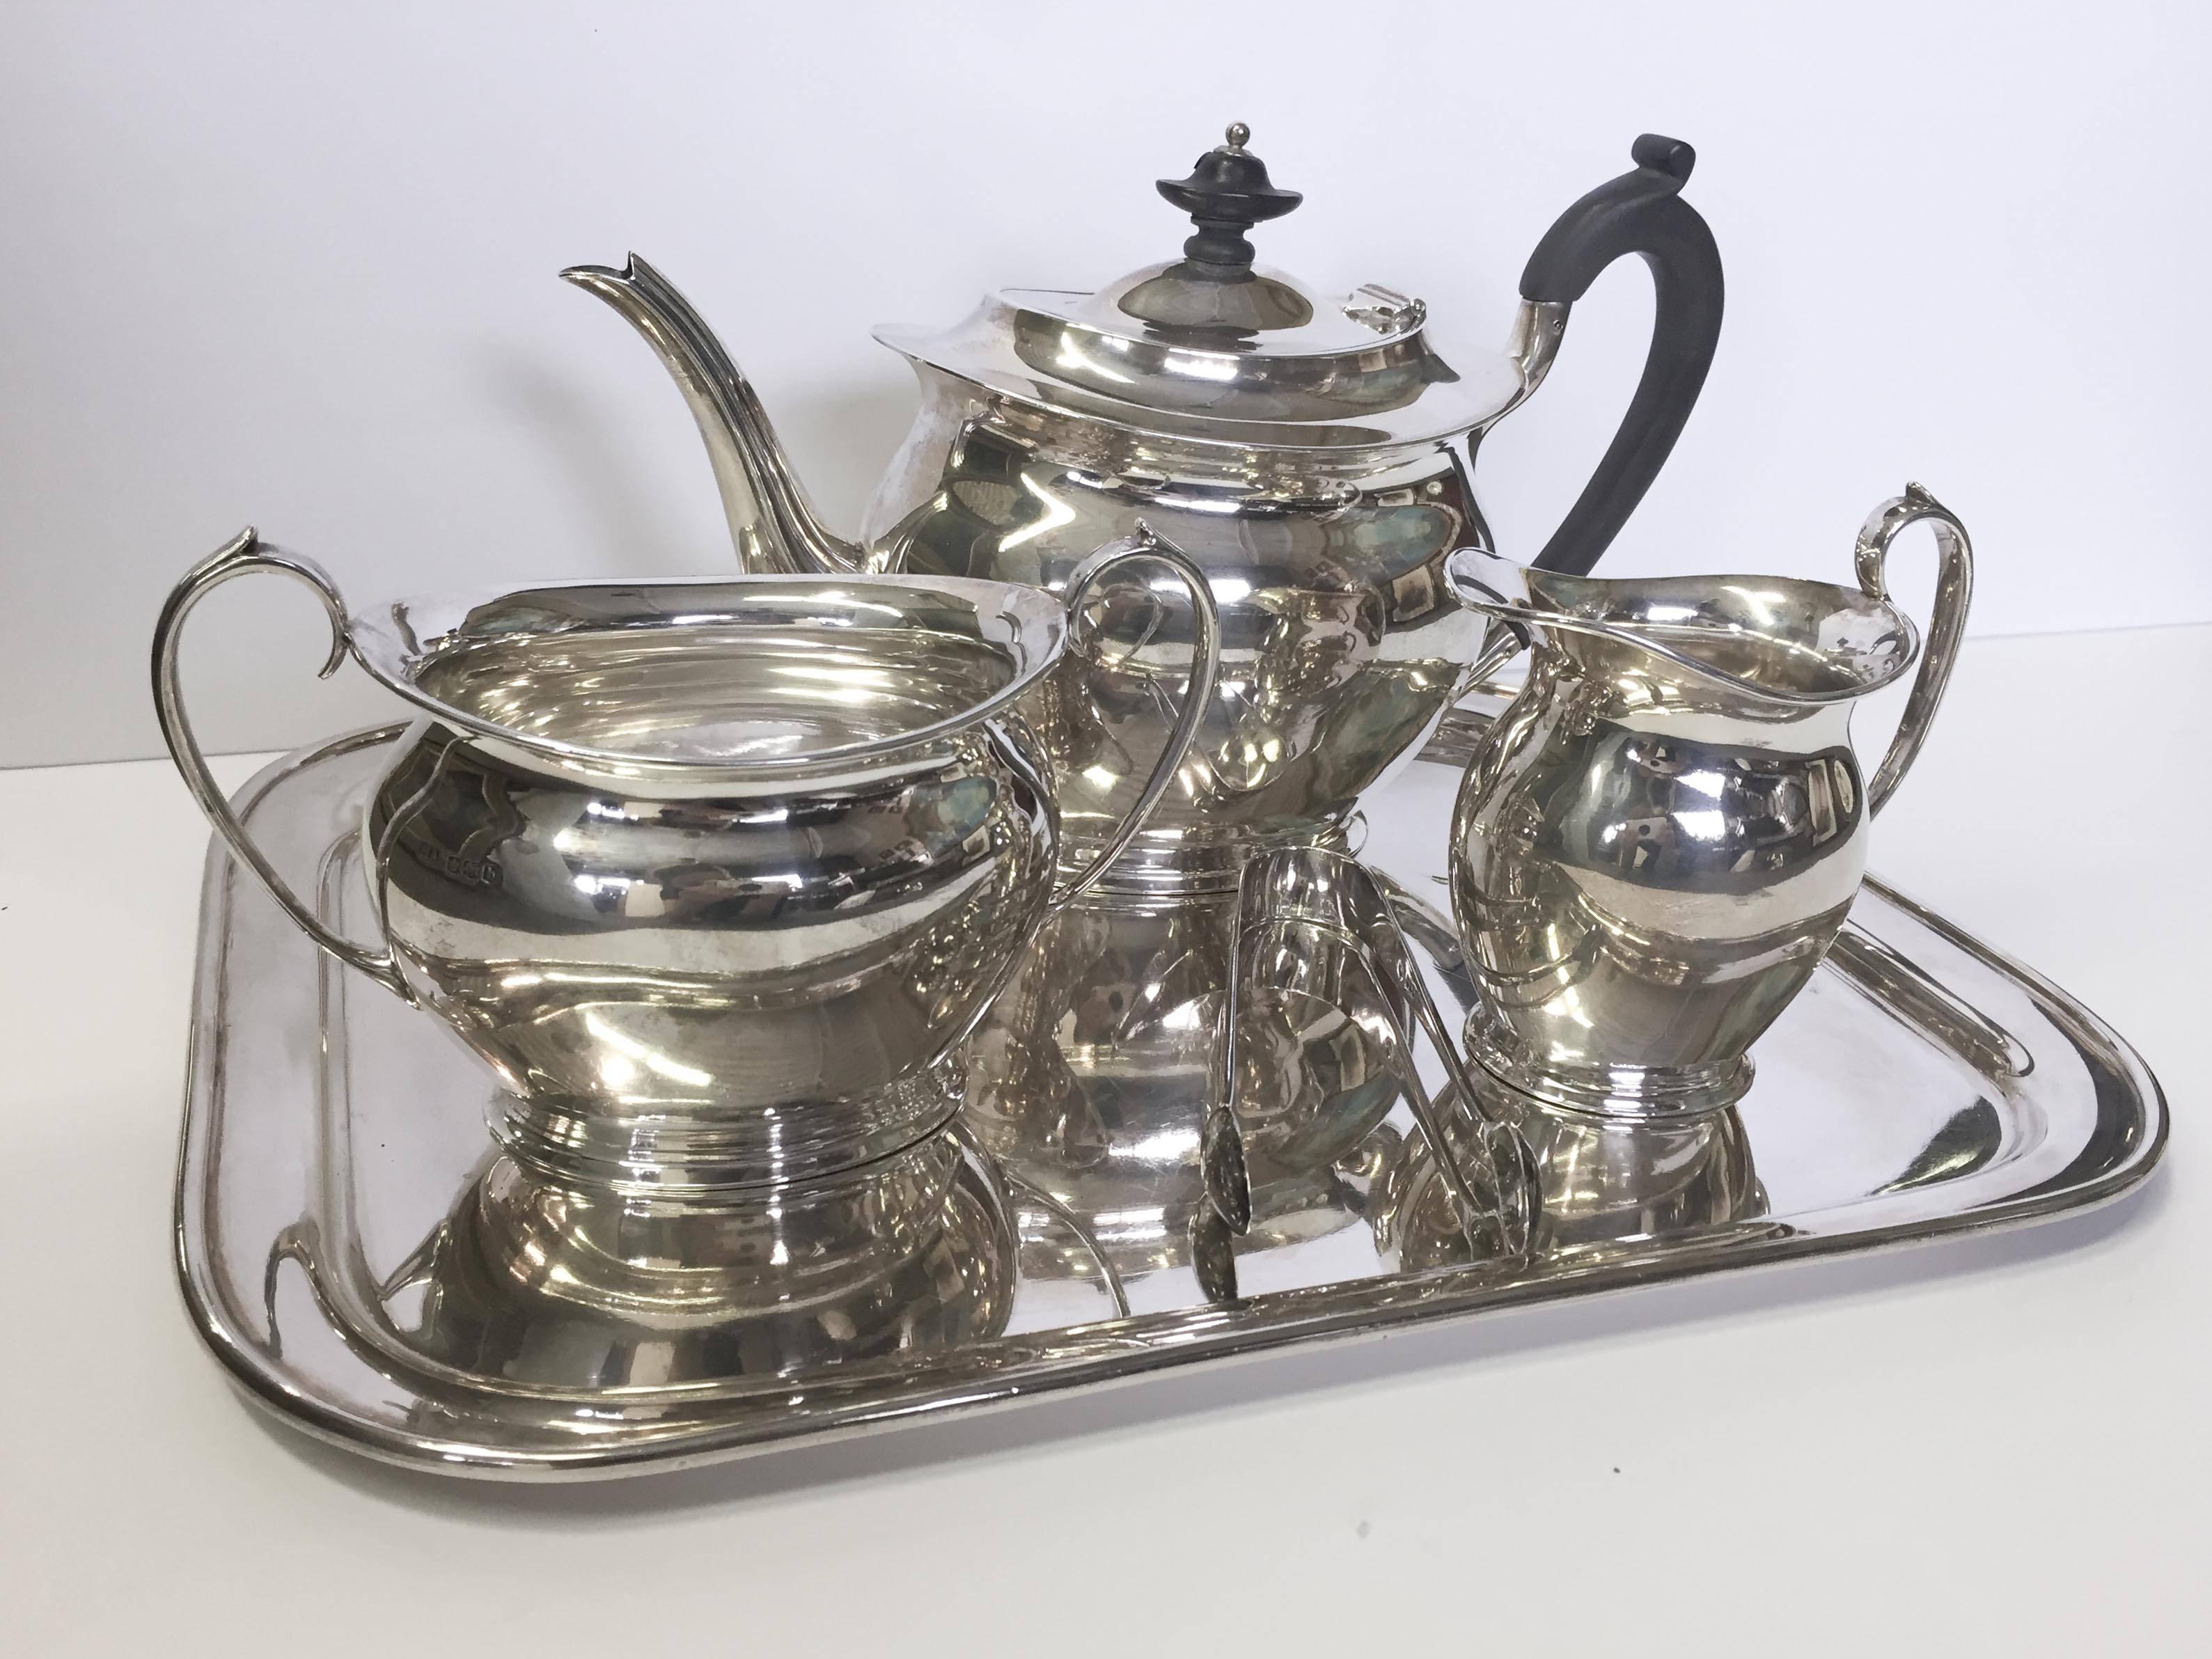 English five-piece sterling silver tea set, all pieces original to the set with the exception of the tongs, which are of the age and style. Sheffield marked.